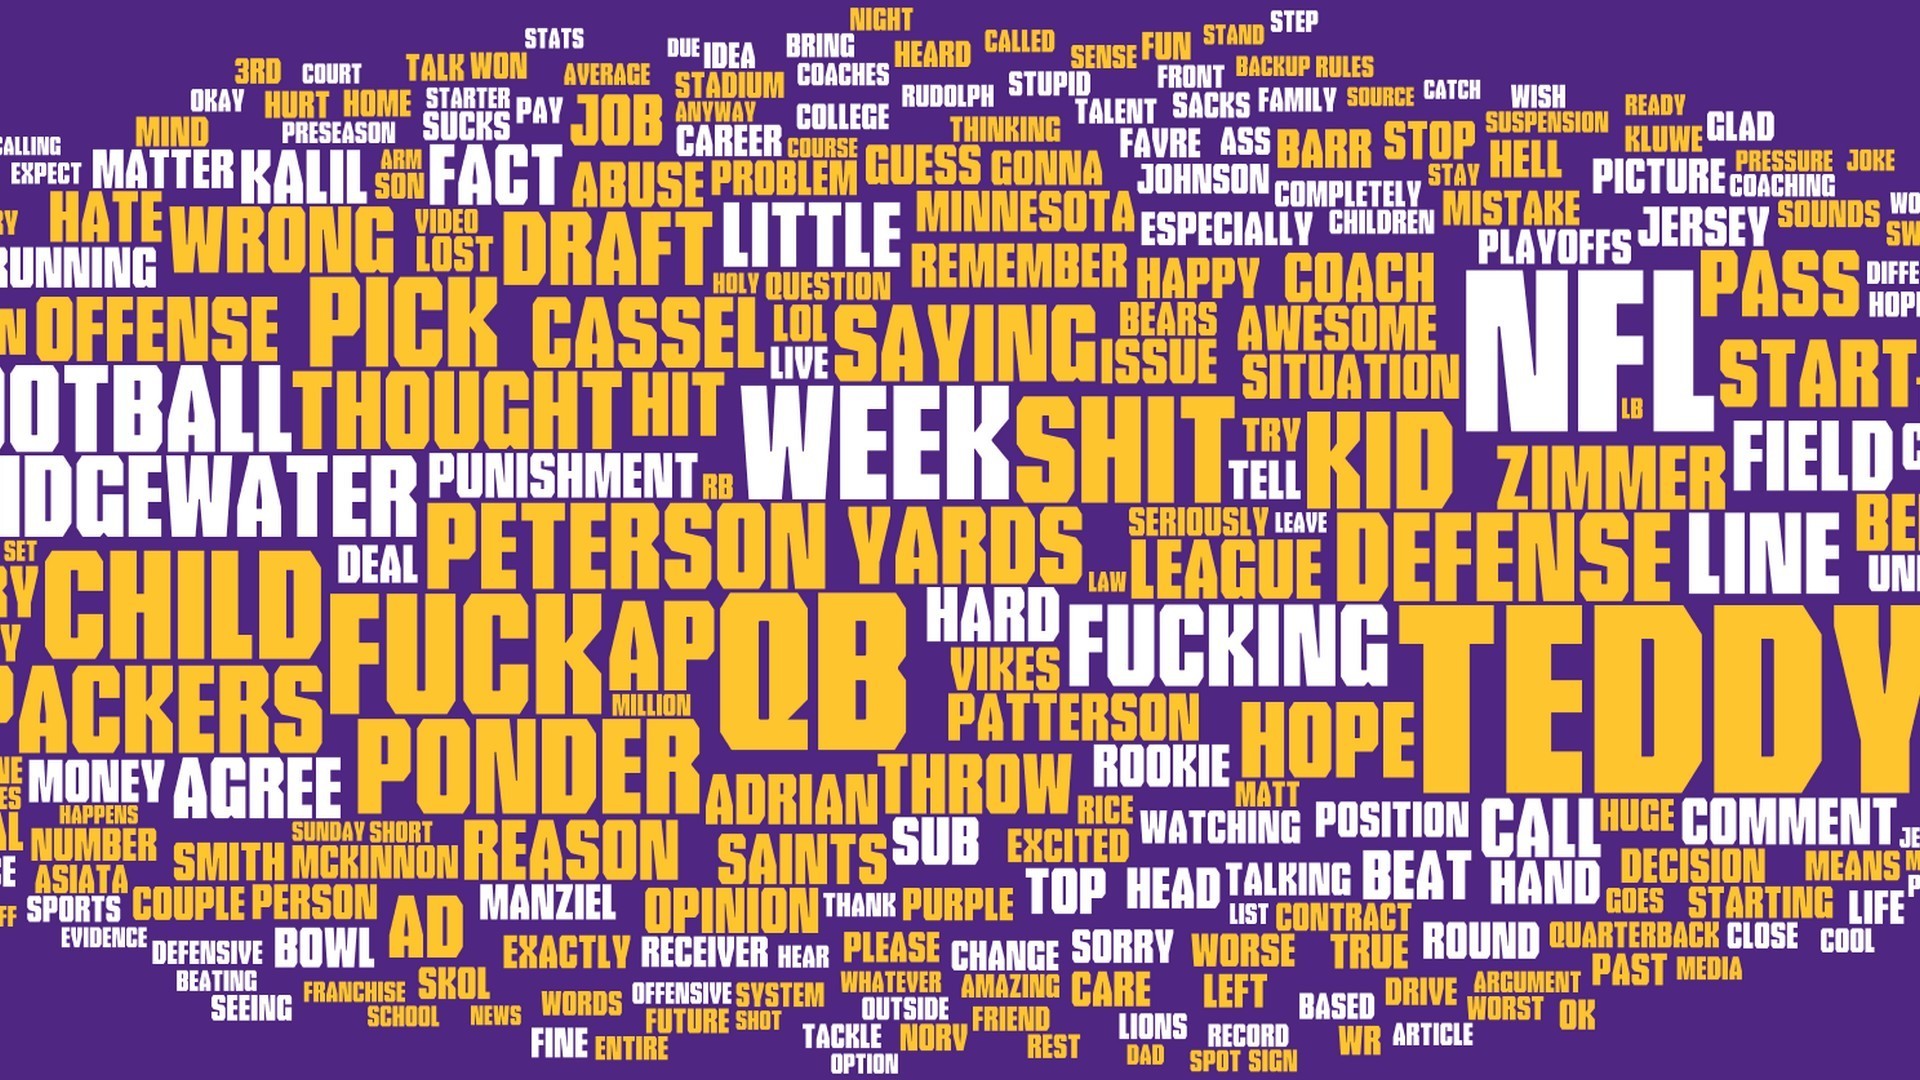 Minnesota Vikings Laptop Wallpaper with high-resolution 1920x1080 pixel. Download and set as wallpaper for Desktop Computer, Apple iPhone X, XS Max, XR, 8, 7, 6, SE, iPad, Android